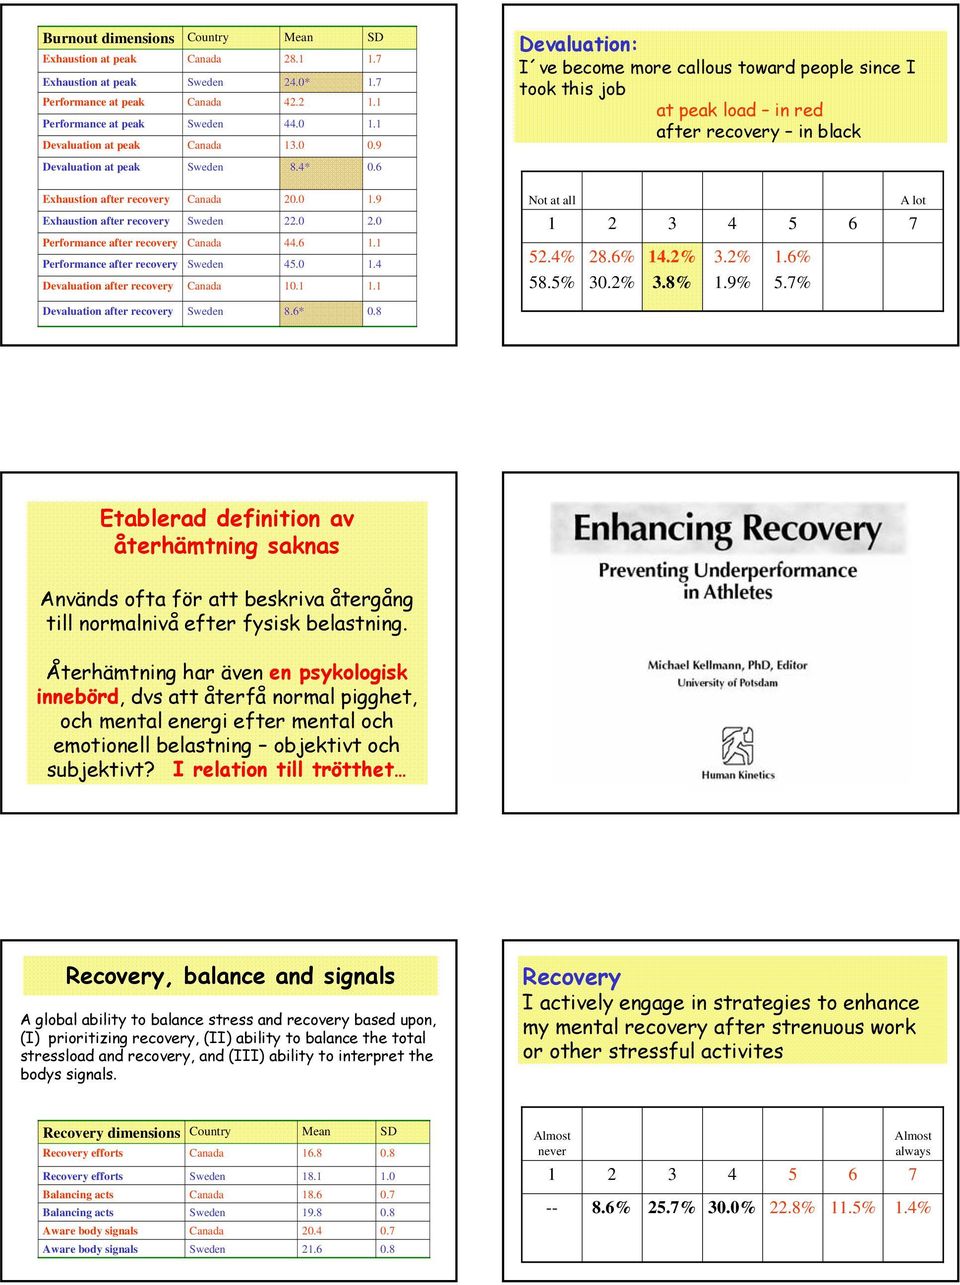 Exhaustion after recovery 0.0.9 Not at all A lot Exhaustion after recovery Performance after recovery Performance after recovery Devaluation after recovery.0..0 0..0..% 8.% 8.% 0.%.%.8%.%.9%.%.% Devaluation after recovery 8.